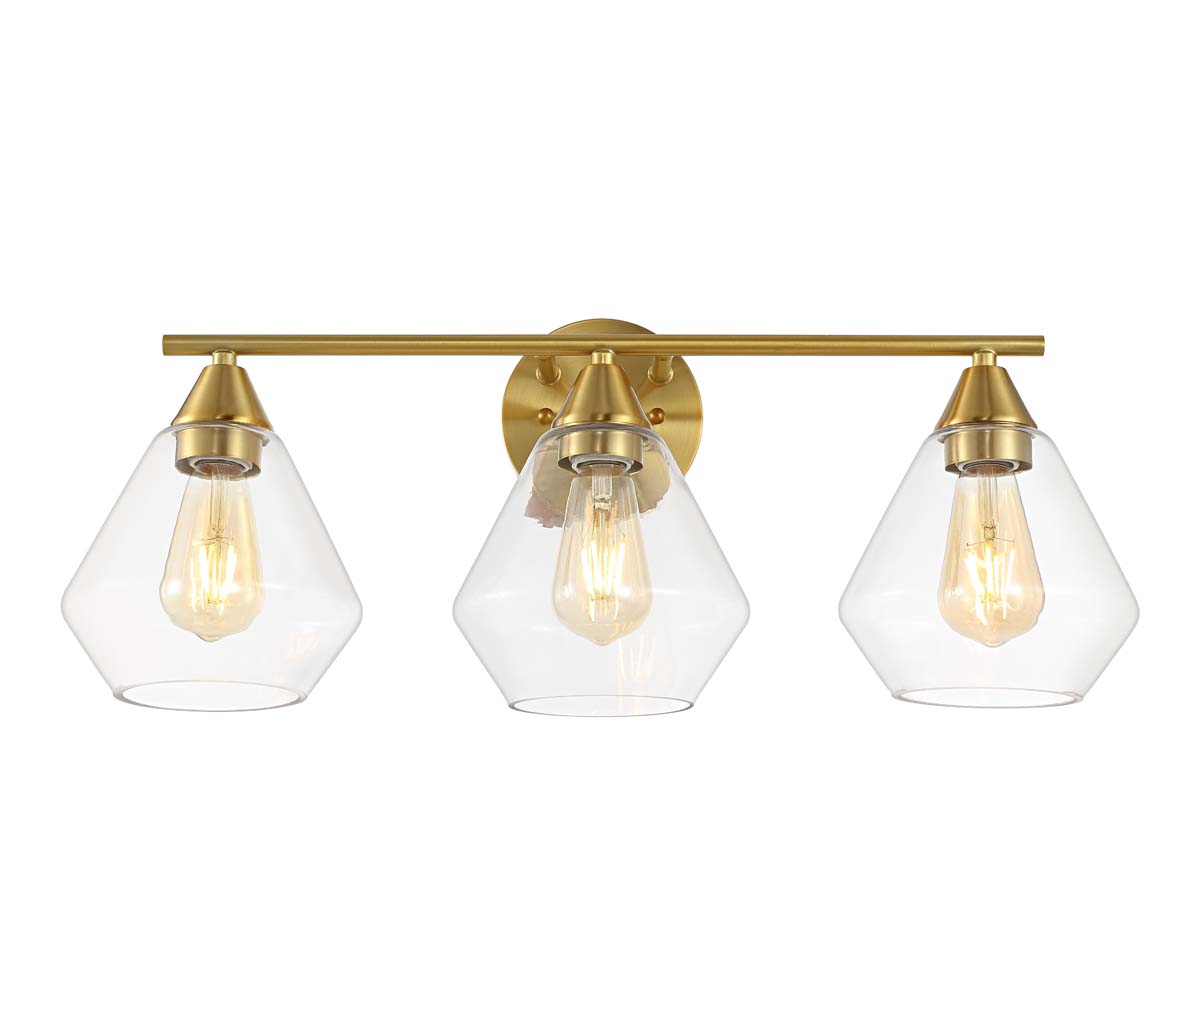 Safavieh Amani Wall Sconce , SCN4134 - Brass / Clear